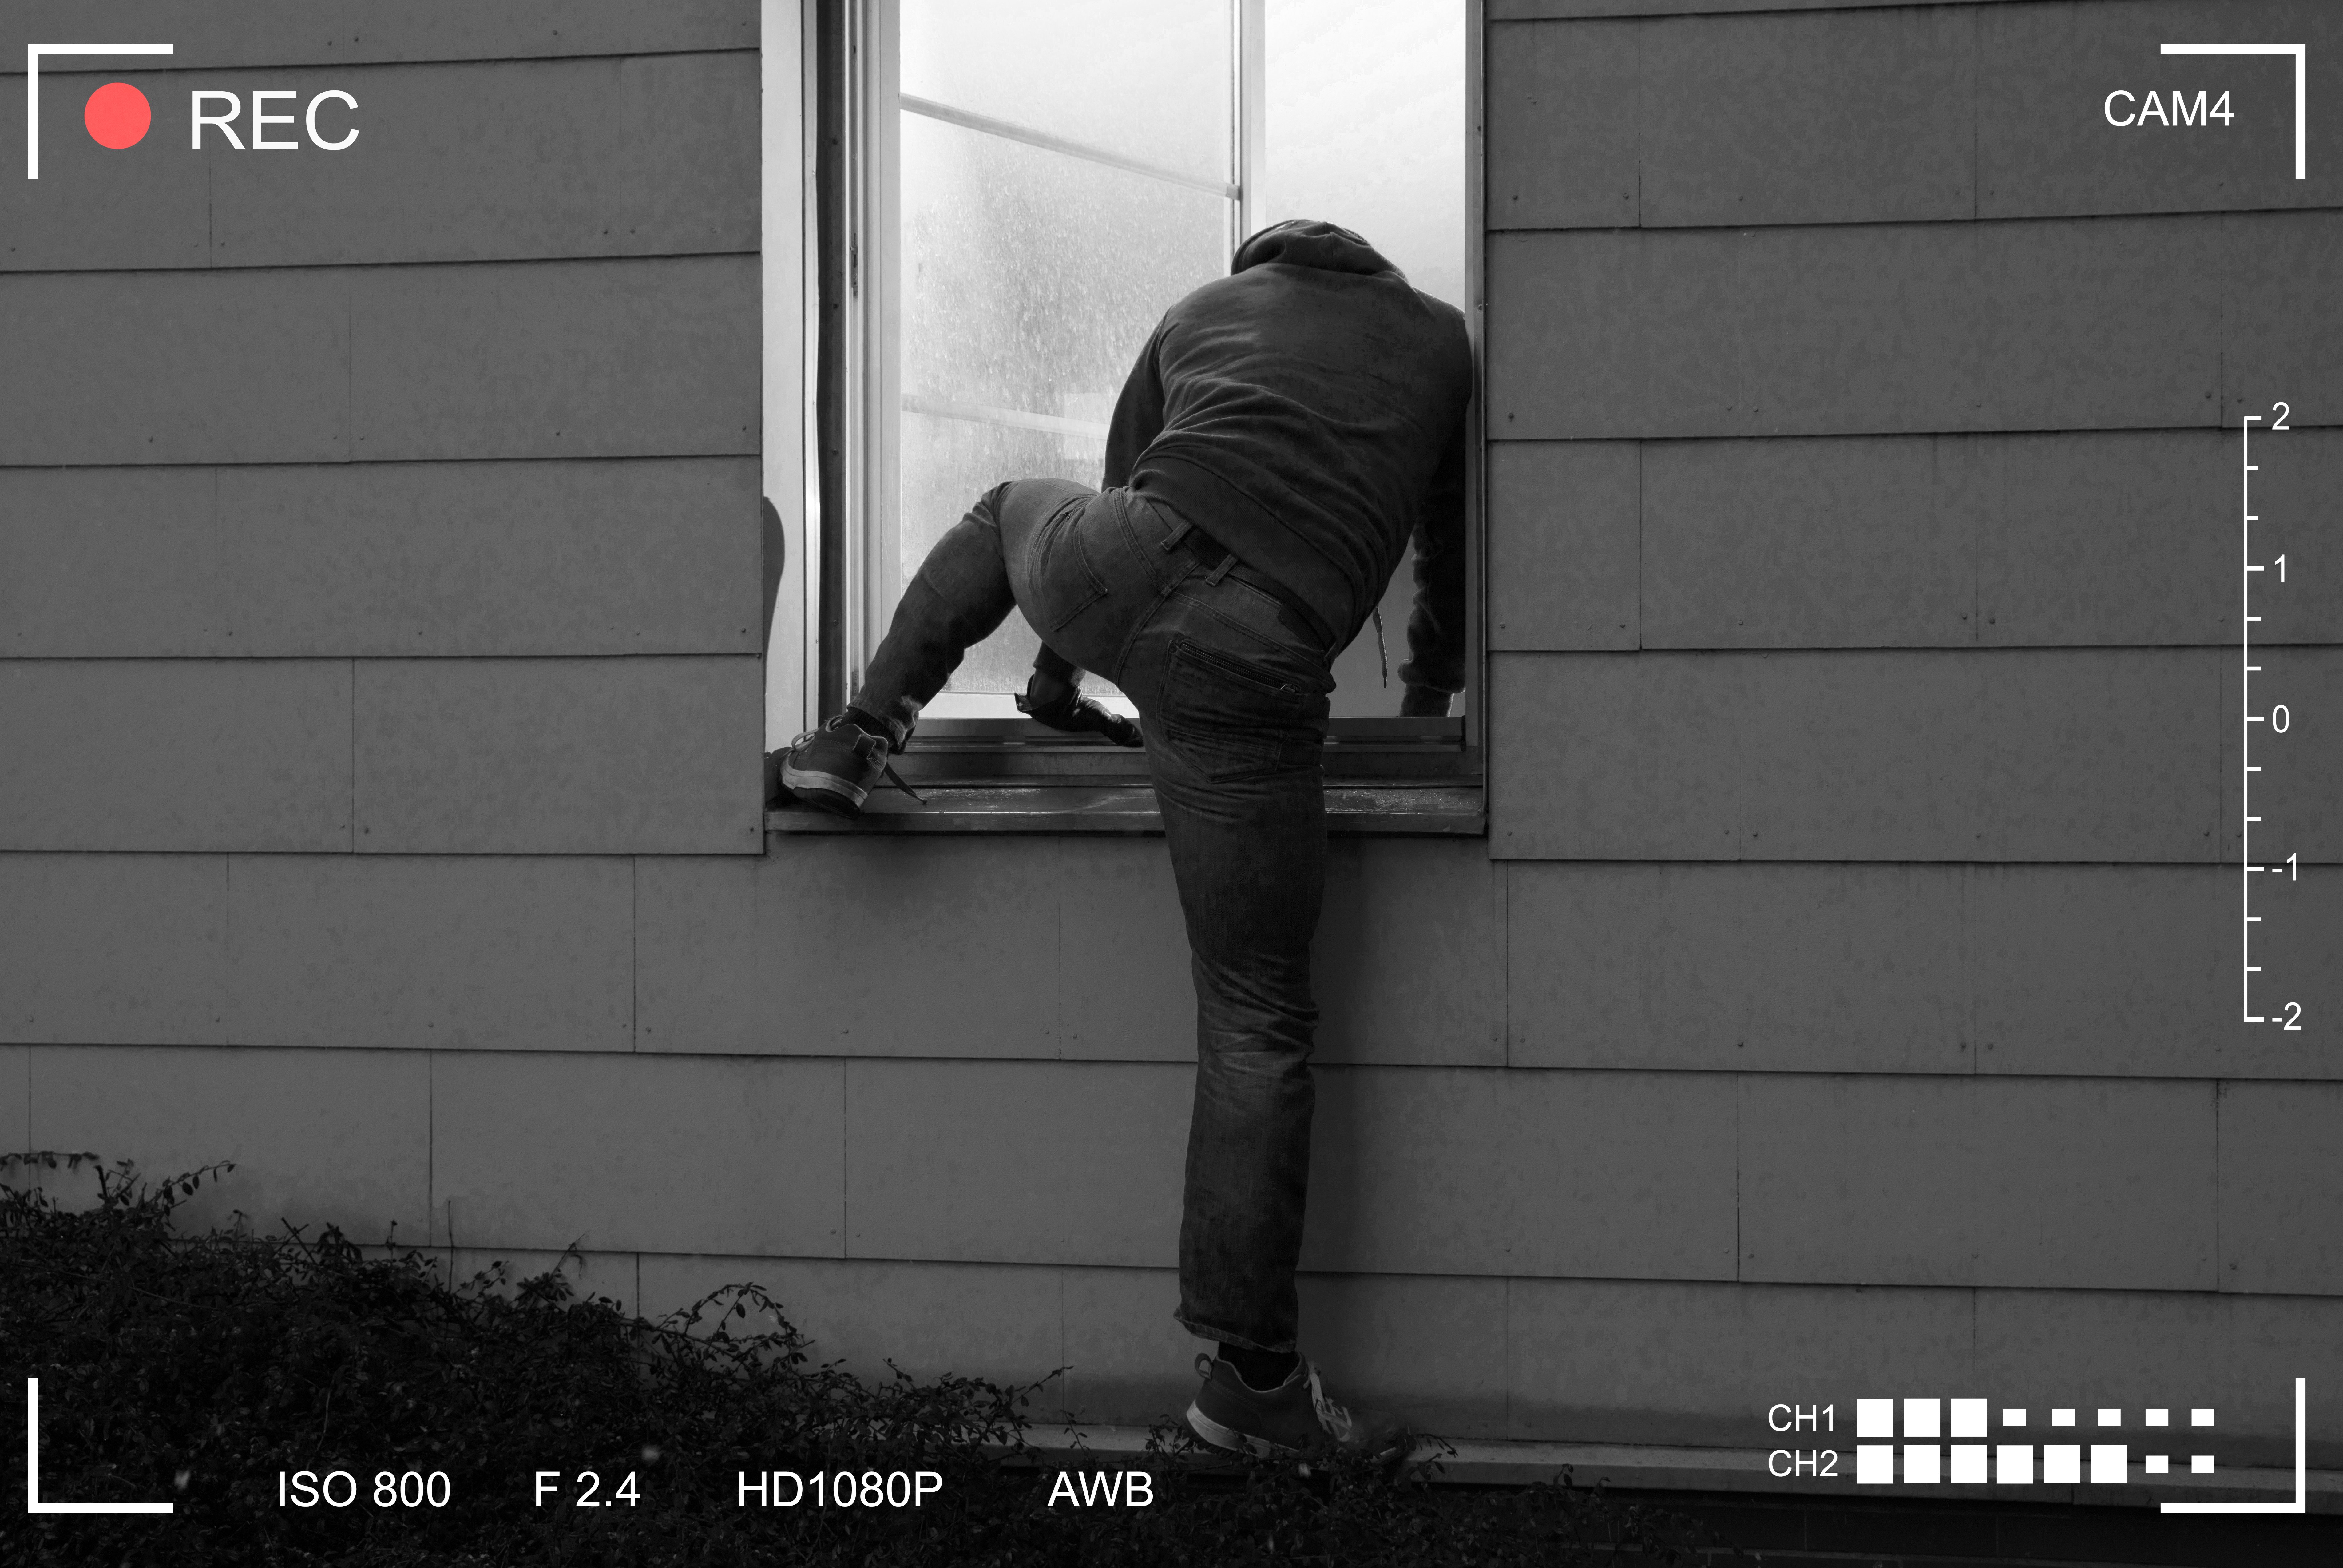 Thief is caught on camera as he attempts to break into a house via a window | Photo: Shutterstock/Andrey_Popov